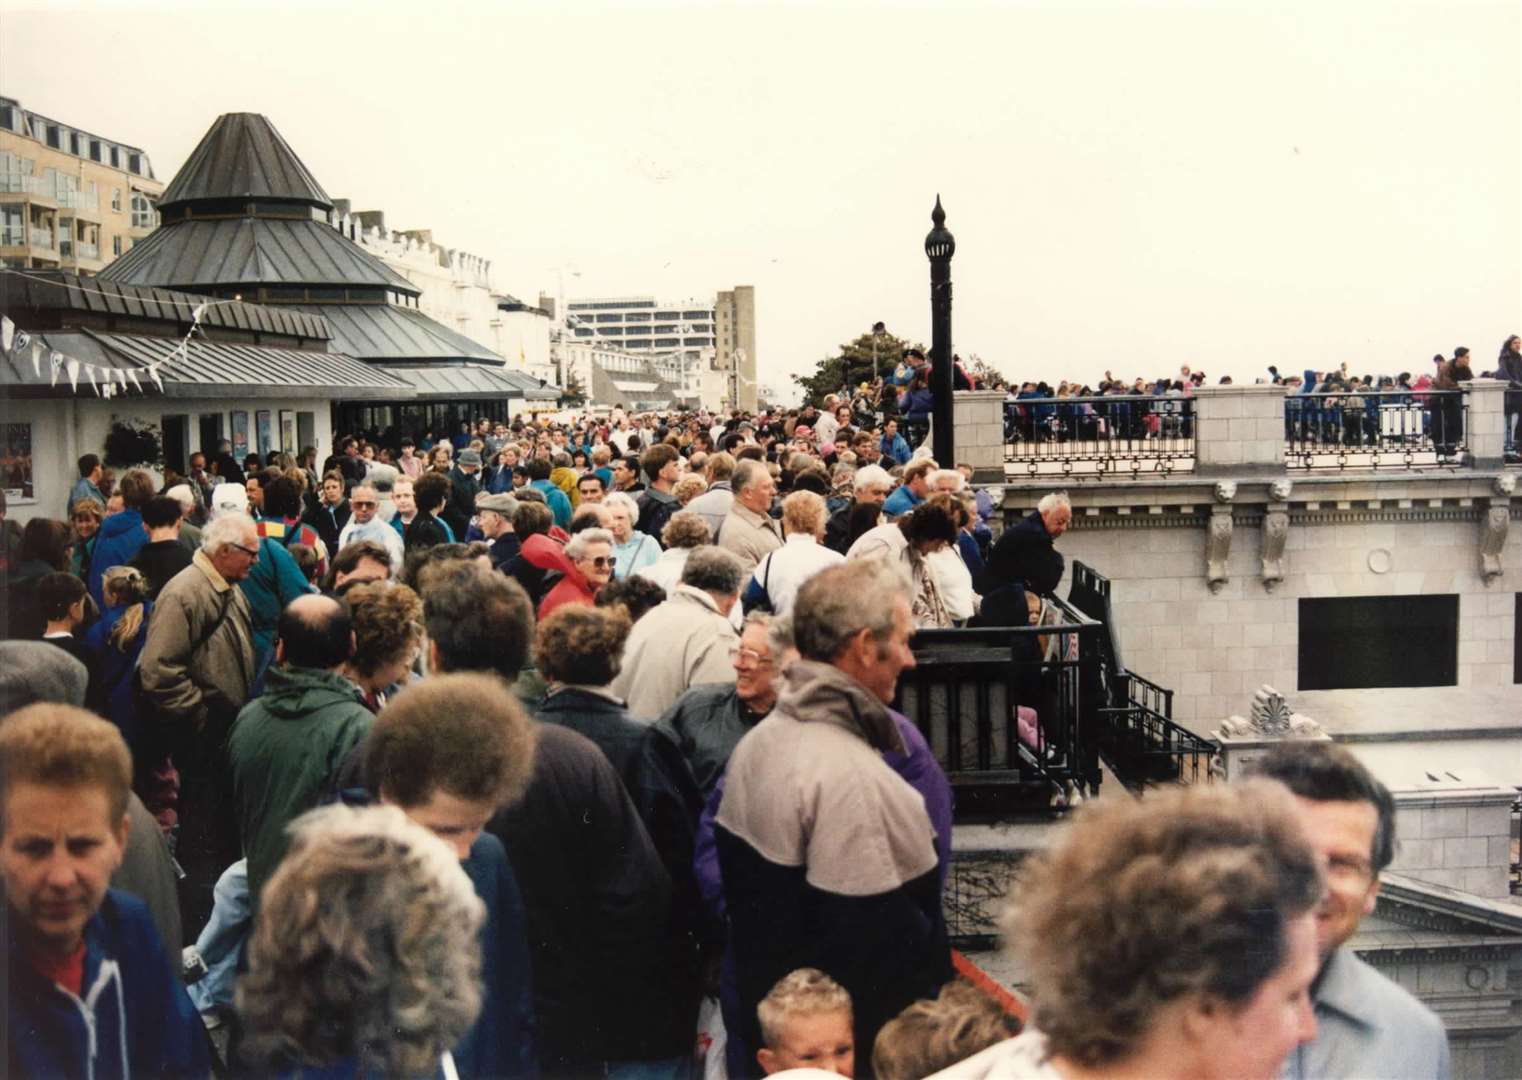 Crowds packed along the Leas in Folkestone in 1992 for the Shepway Air Festival